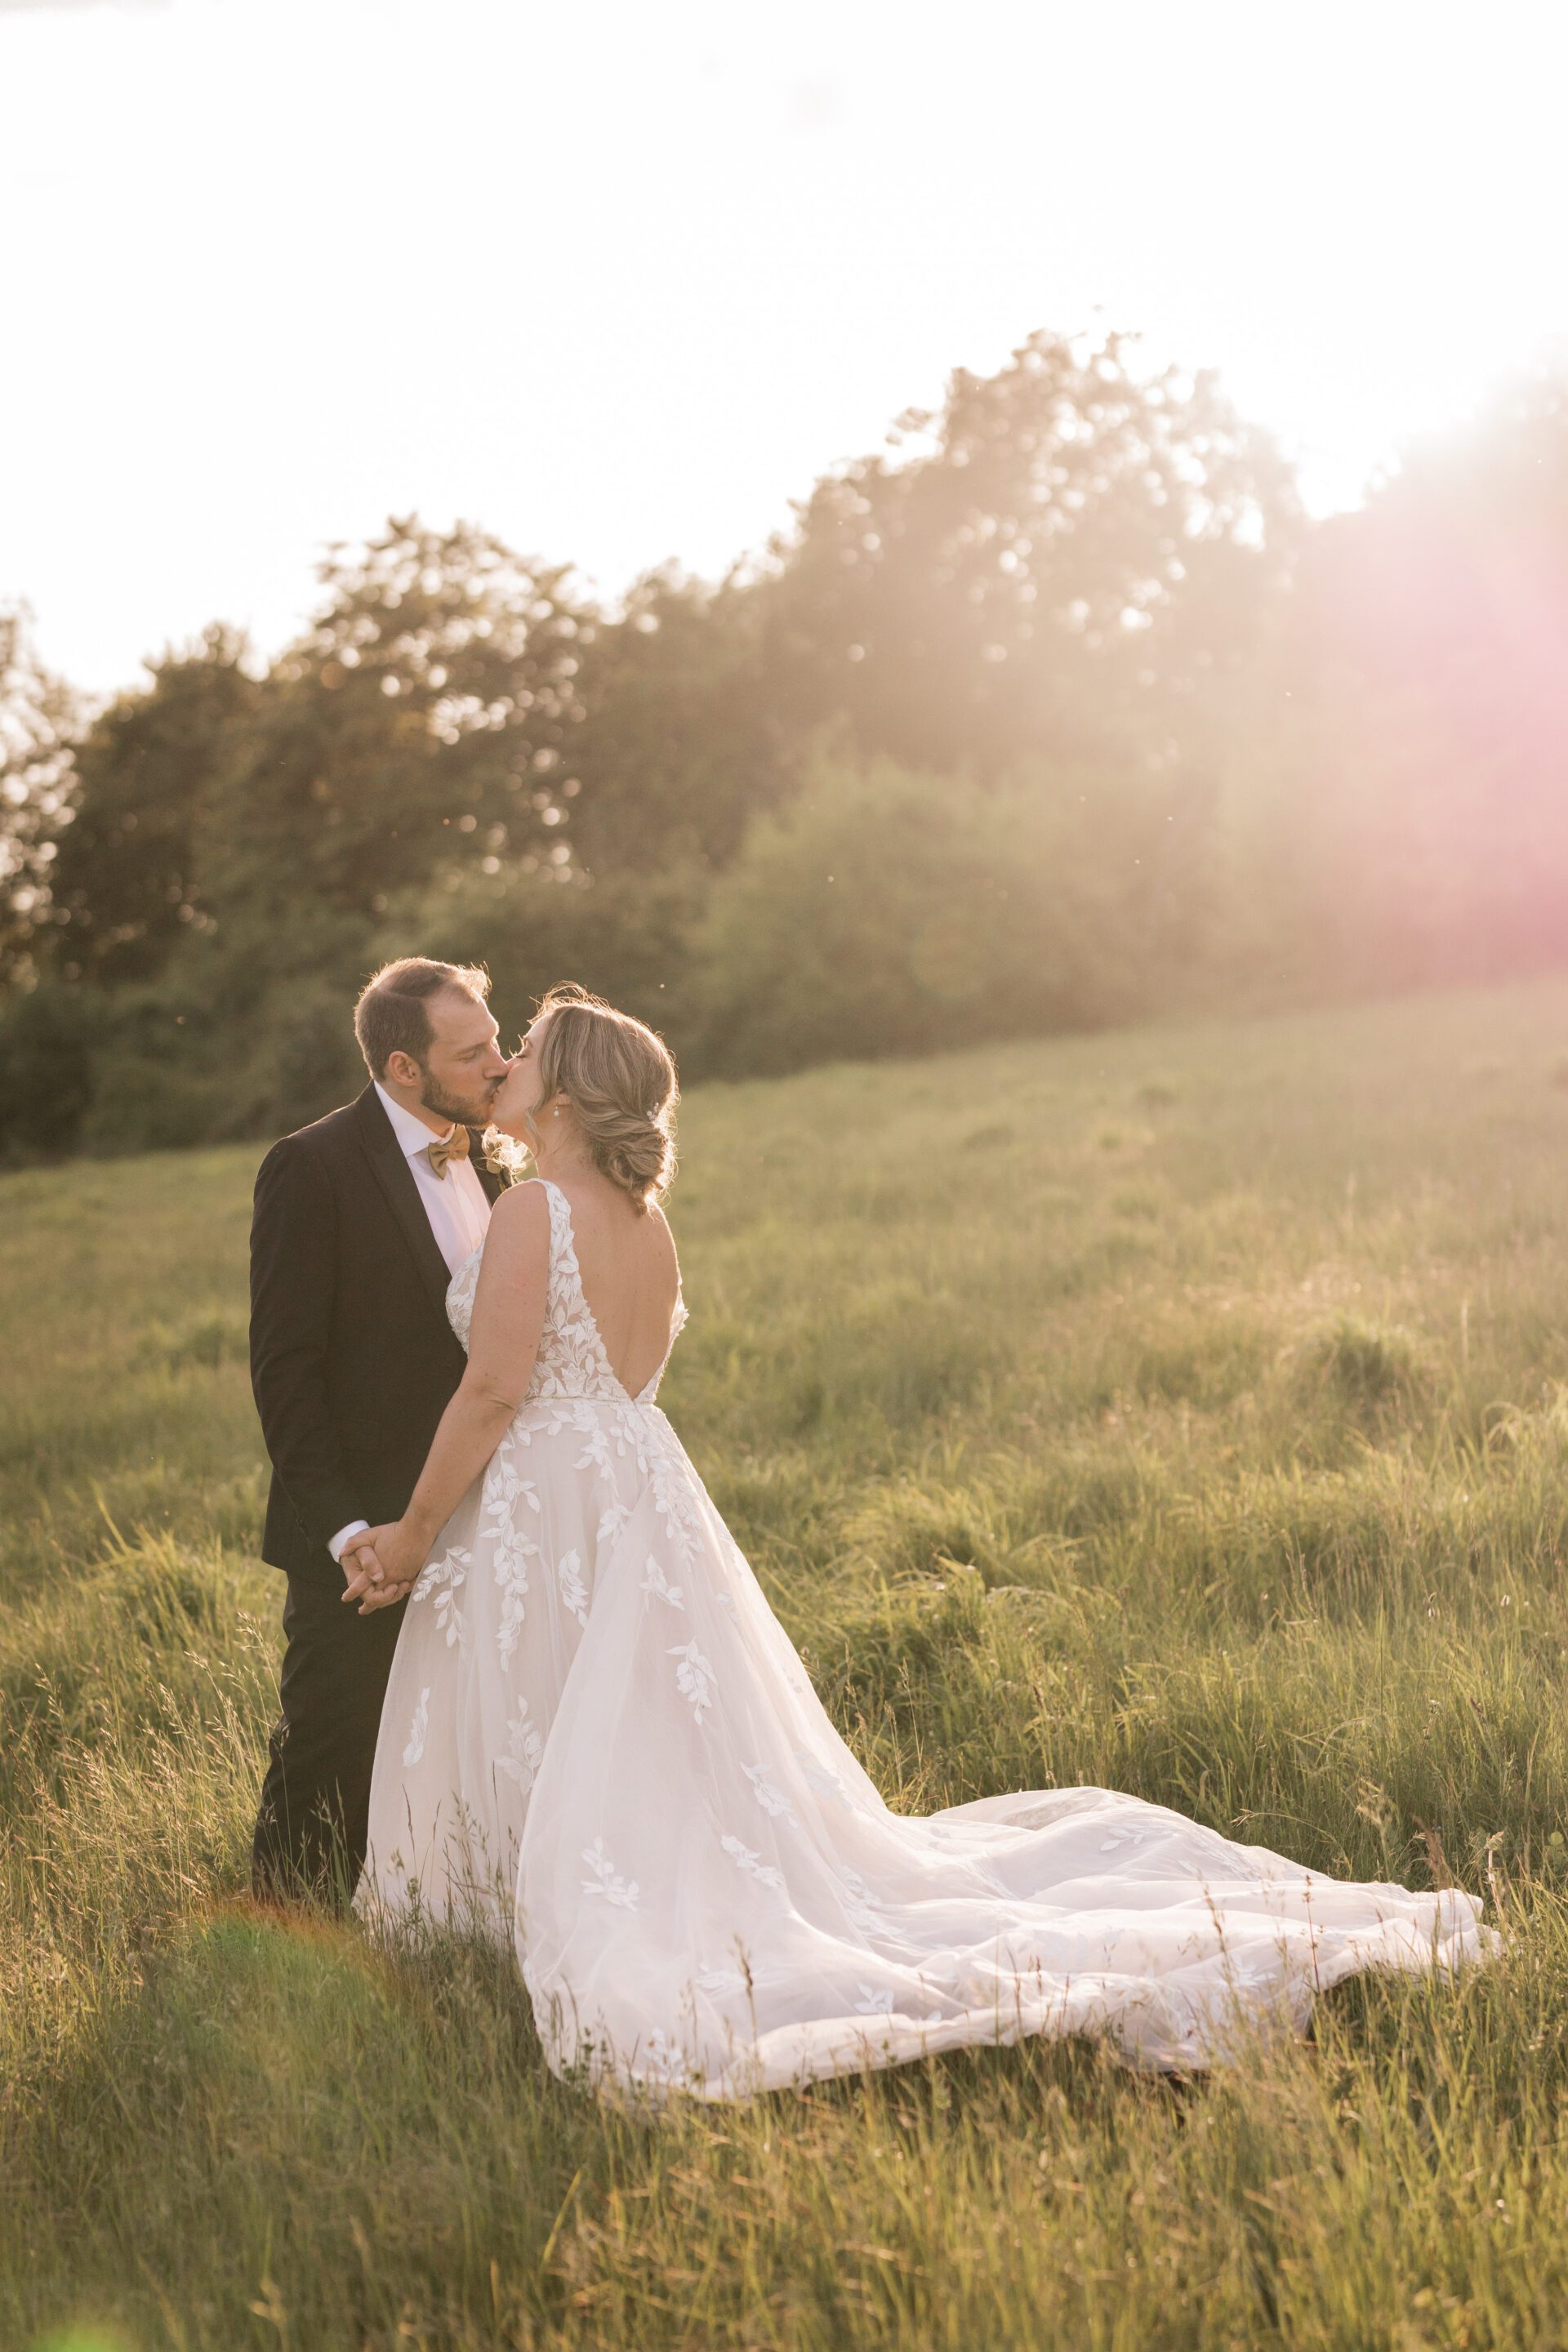 The bride and groom share a kiss during a golden hour couple portrait session